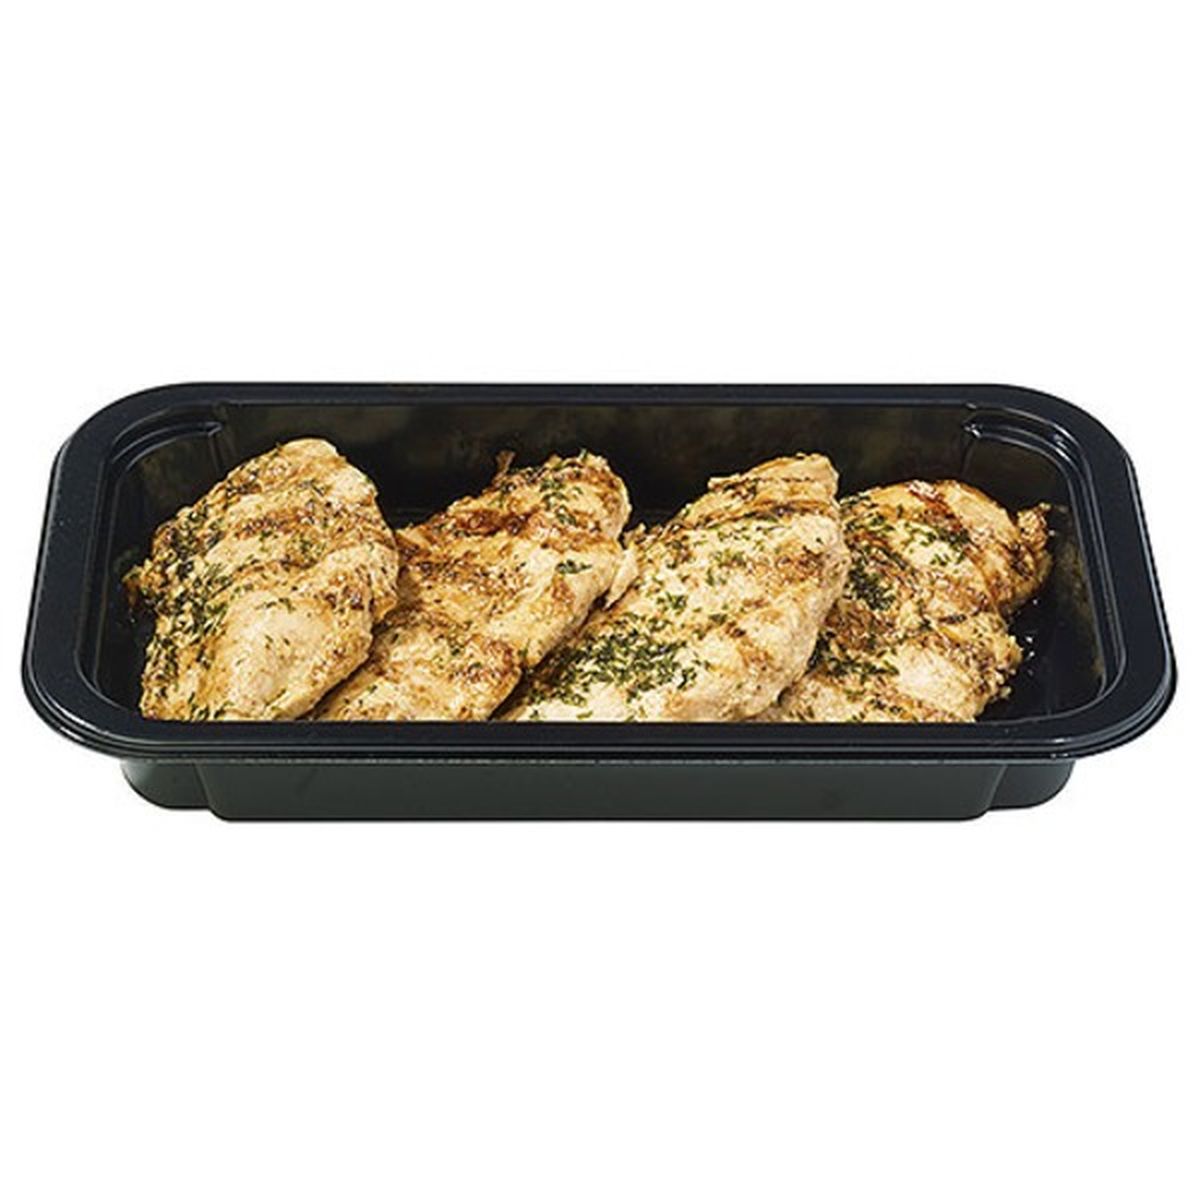 Calories in Wegmans Grilled Lemon Garlic Boneless Chicken Breast Raised without Antibiotics- Fully Cooked, FAMILY PACK